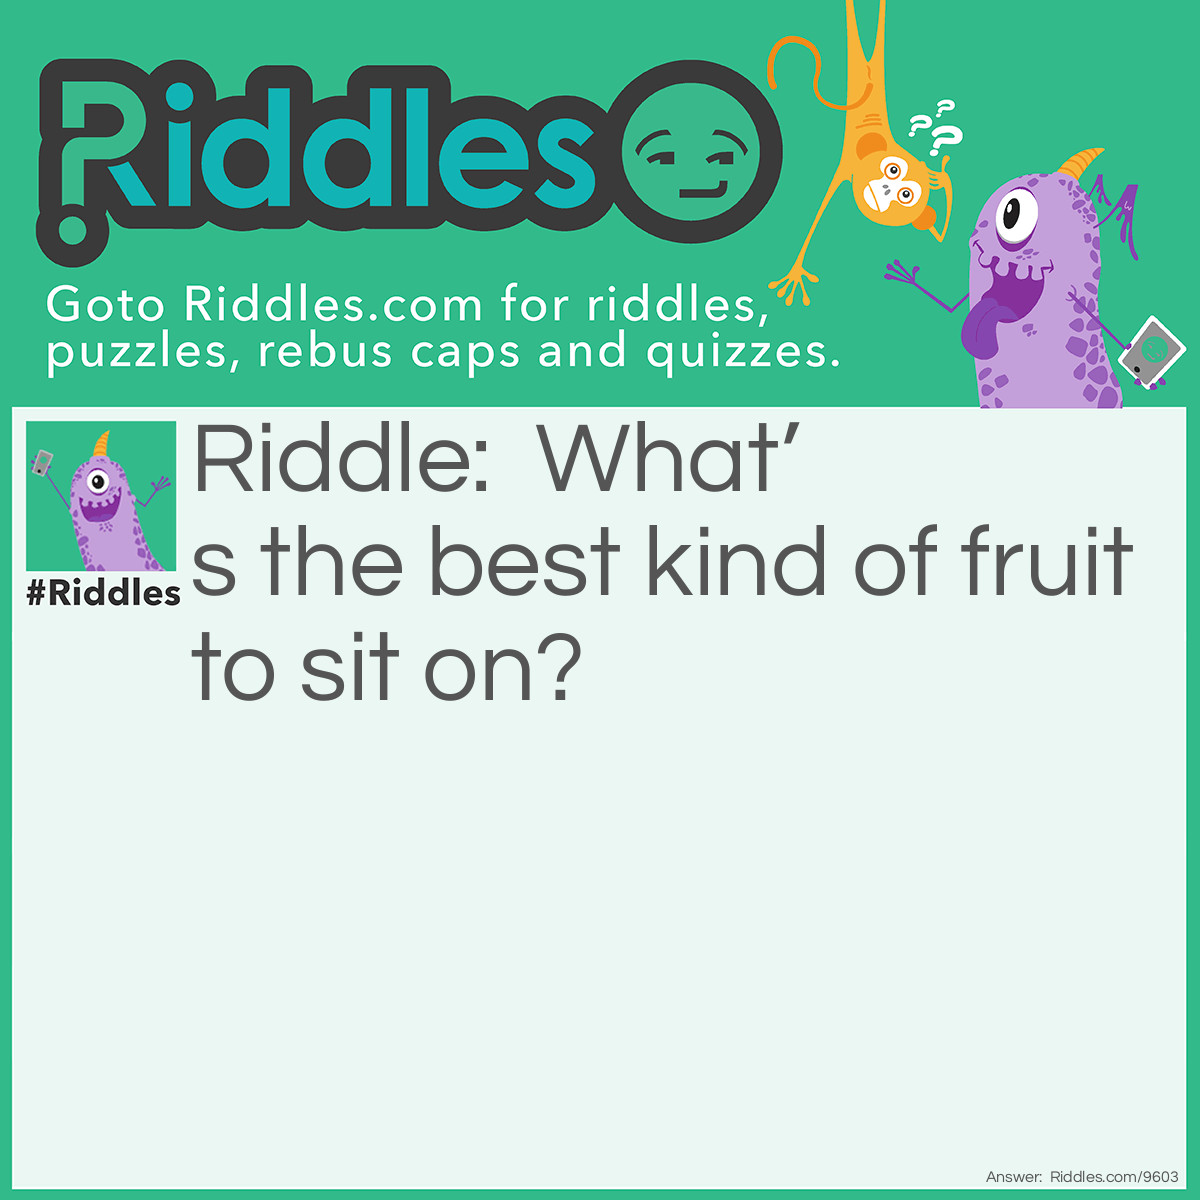 Riddle: What's the best kind of fruit to sit on? Answer: A Chair-y!